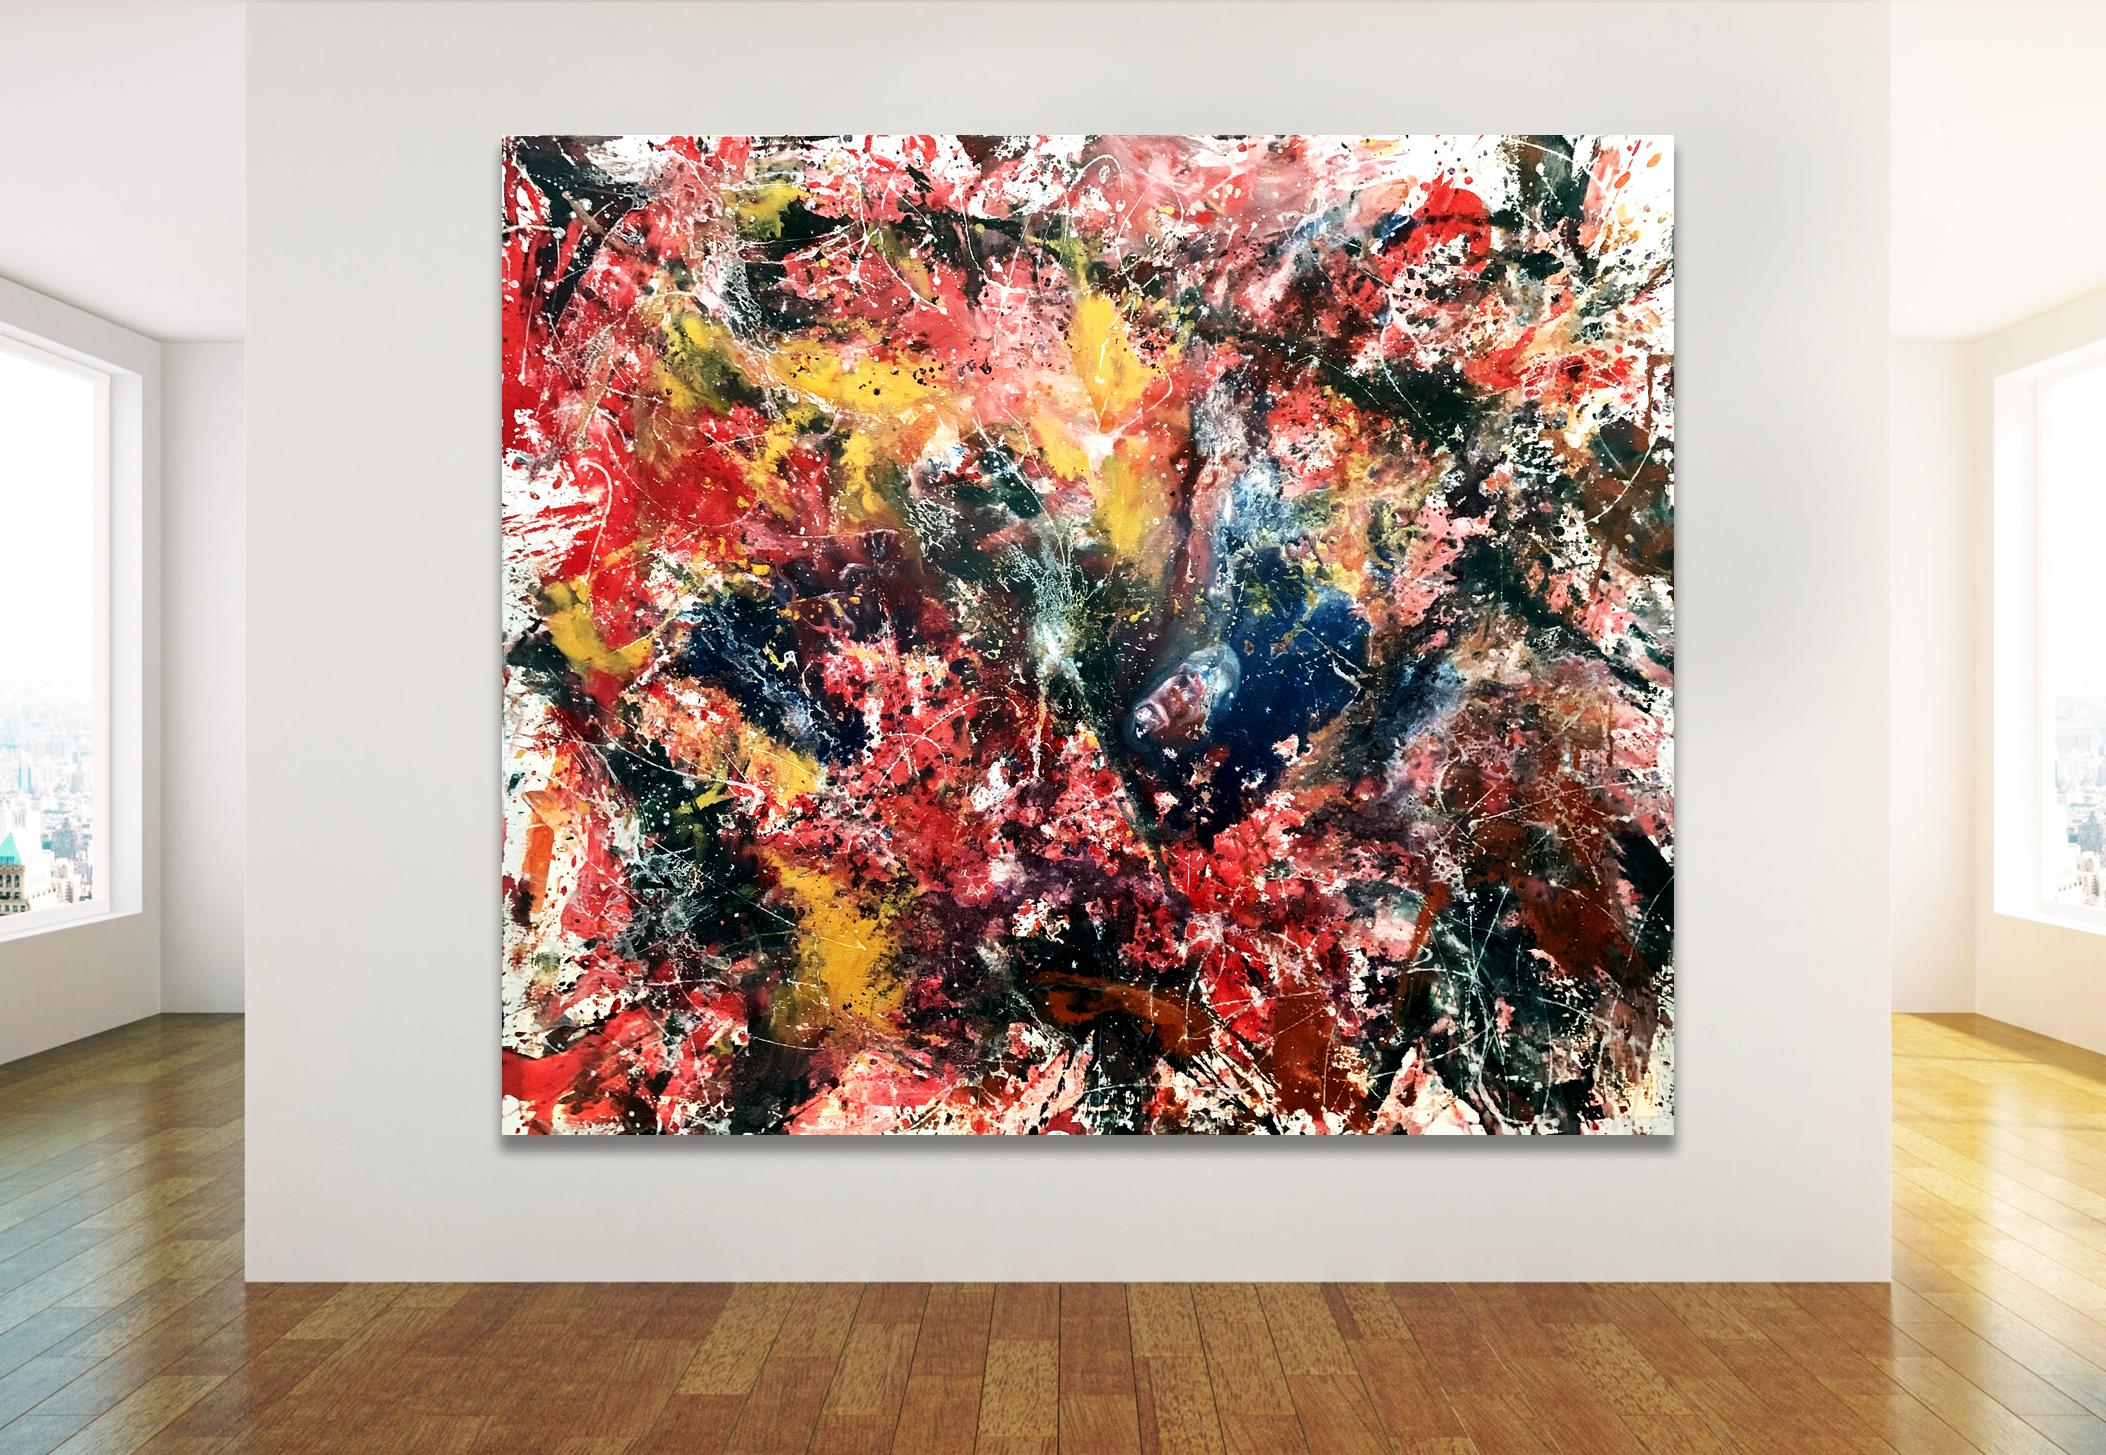 The Dreamtime - Abstract Expressionist Painting by Estelle Asmodelle